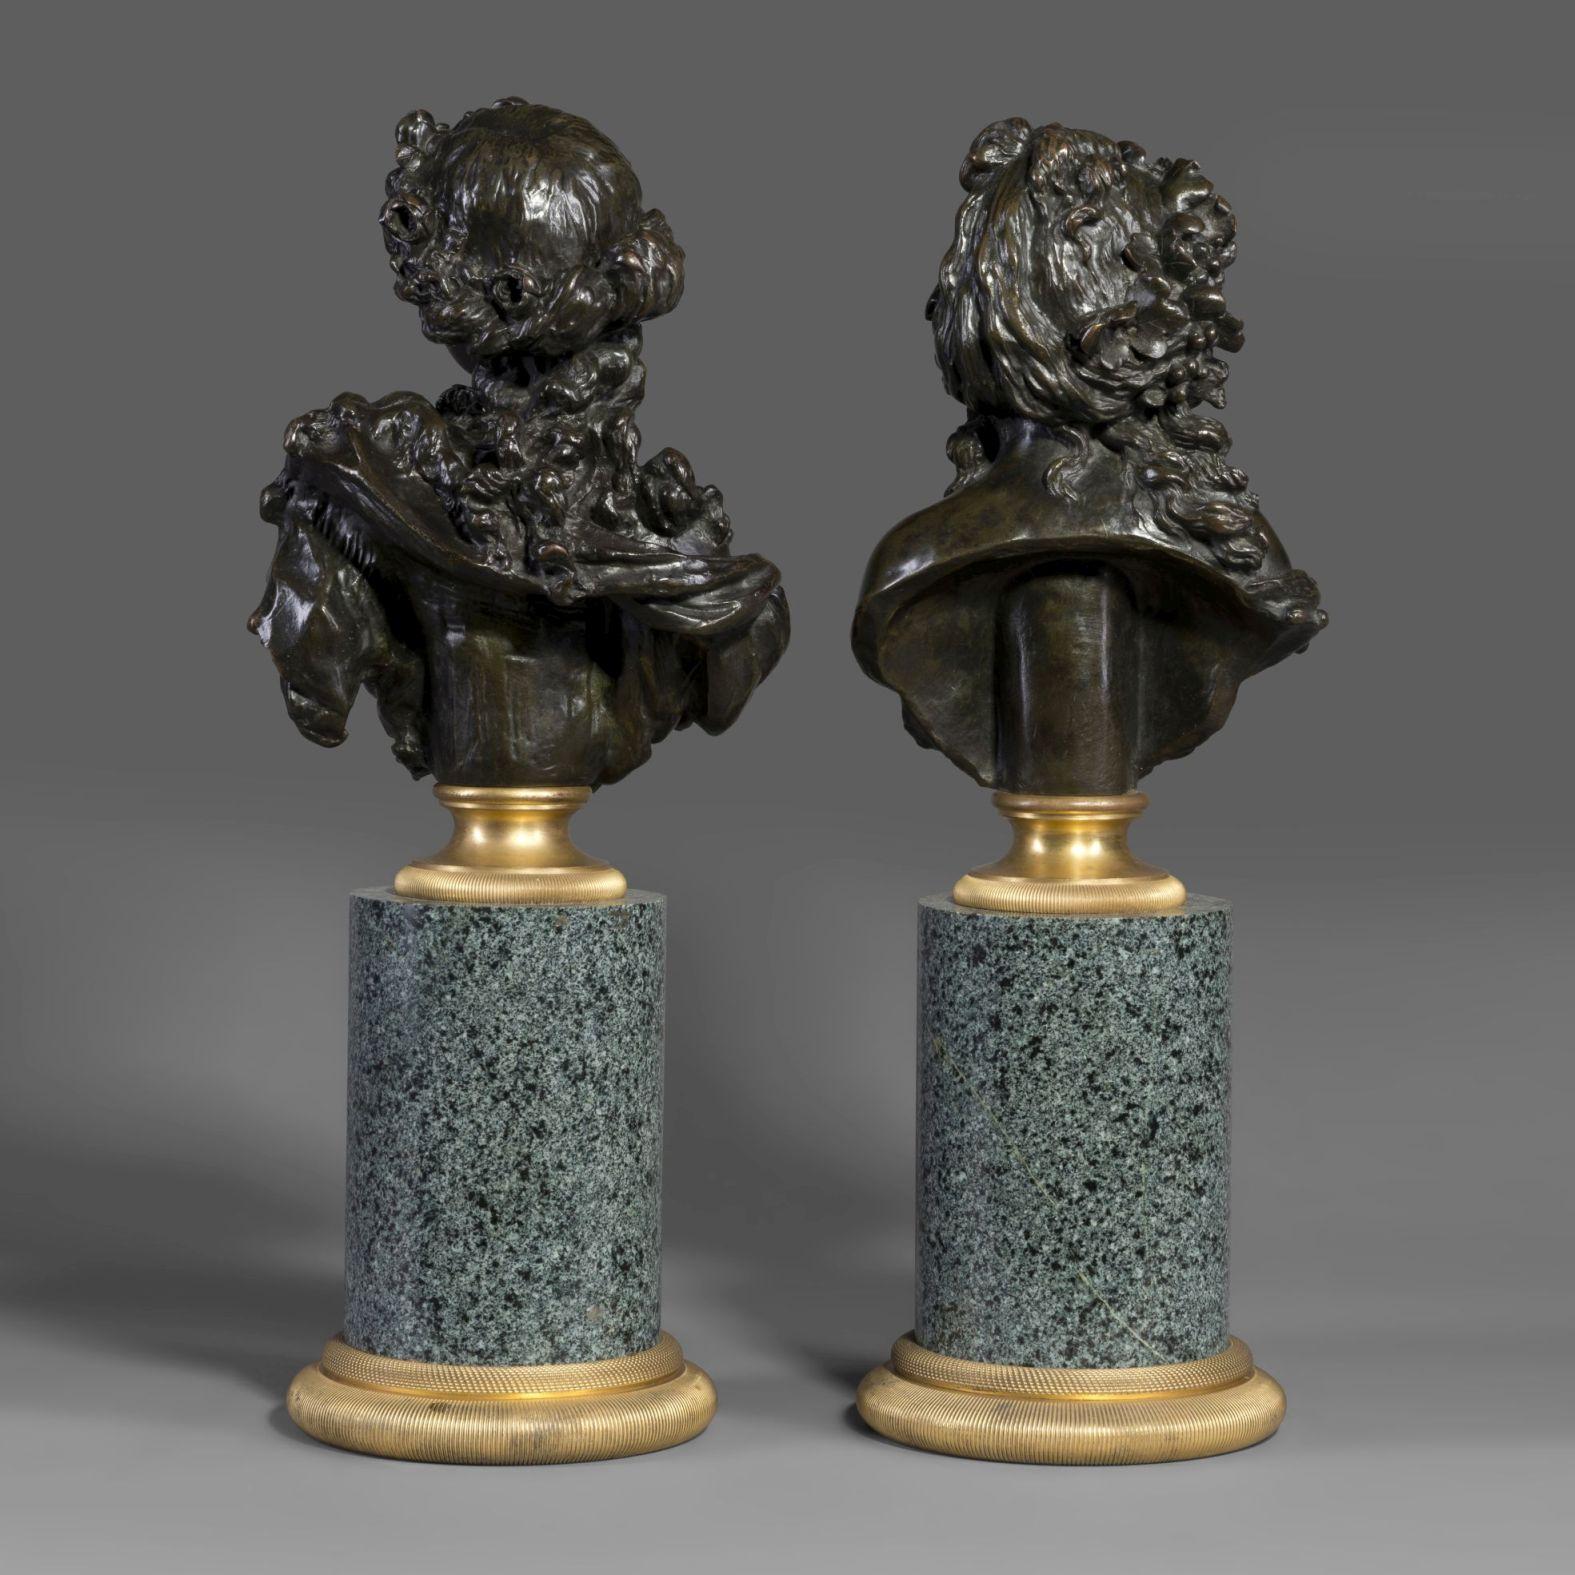 19th Century Patinated Bronze Allegorical Busts of Autumn and Summer By Pierre-Louis Détrier For Sale